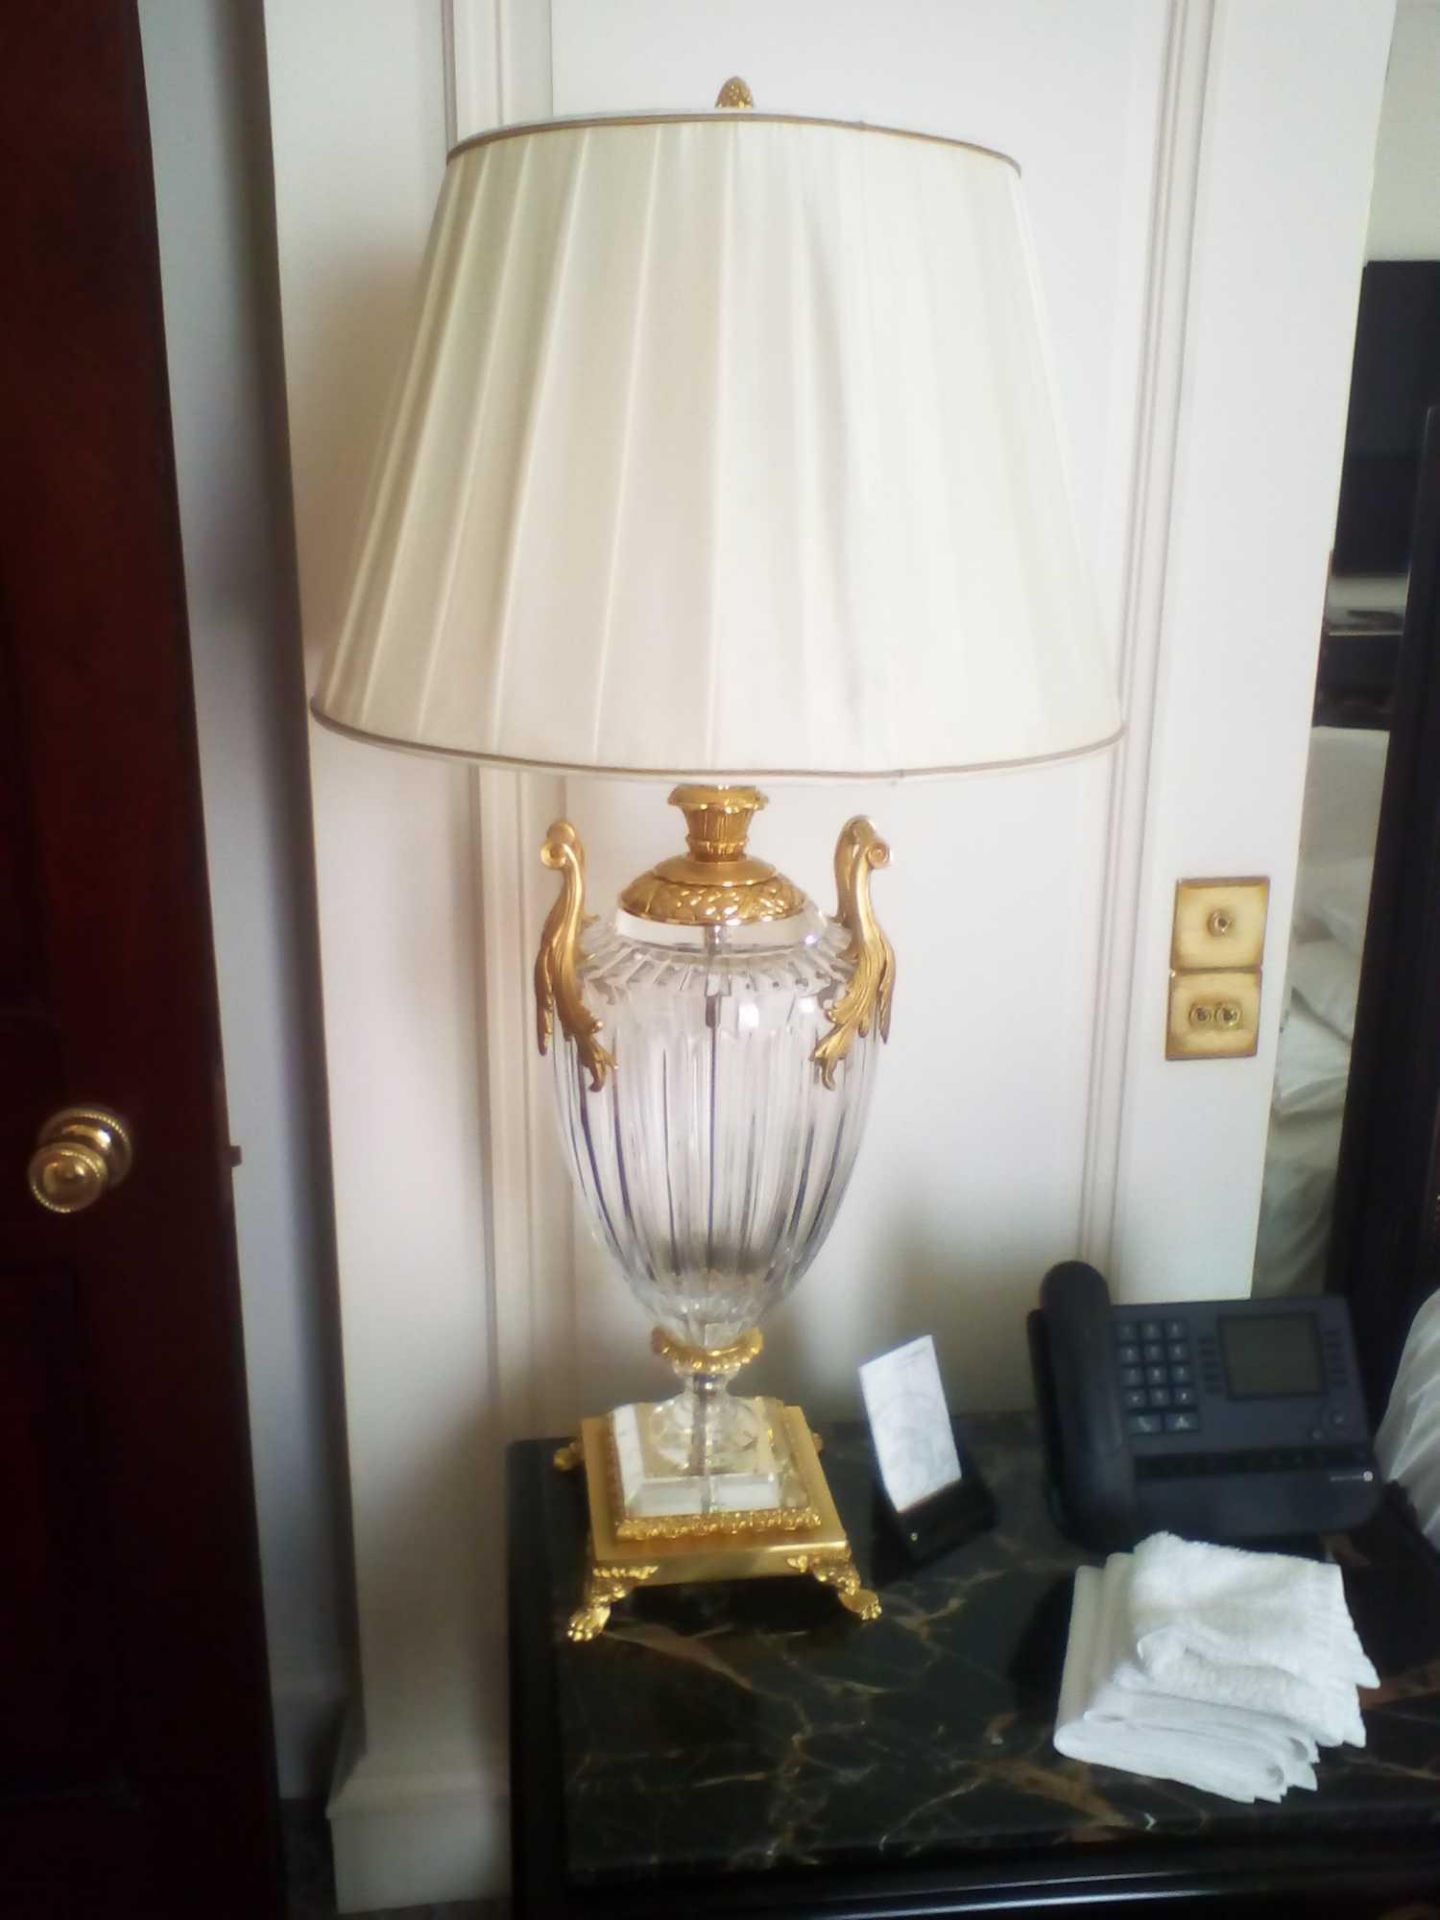 A Laudarte Crystal Table Lamp Inserts And Decorations In 24ct Gold With Shade 95cm Tall (Room 101